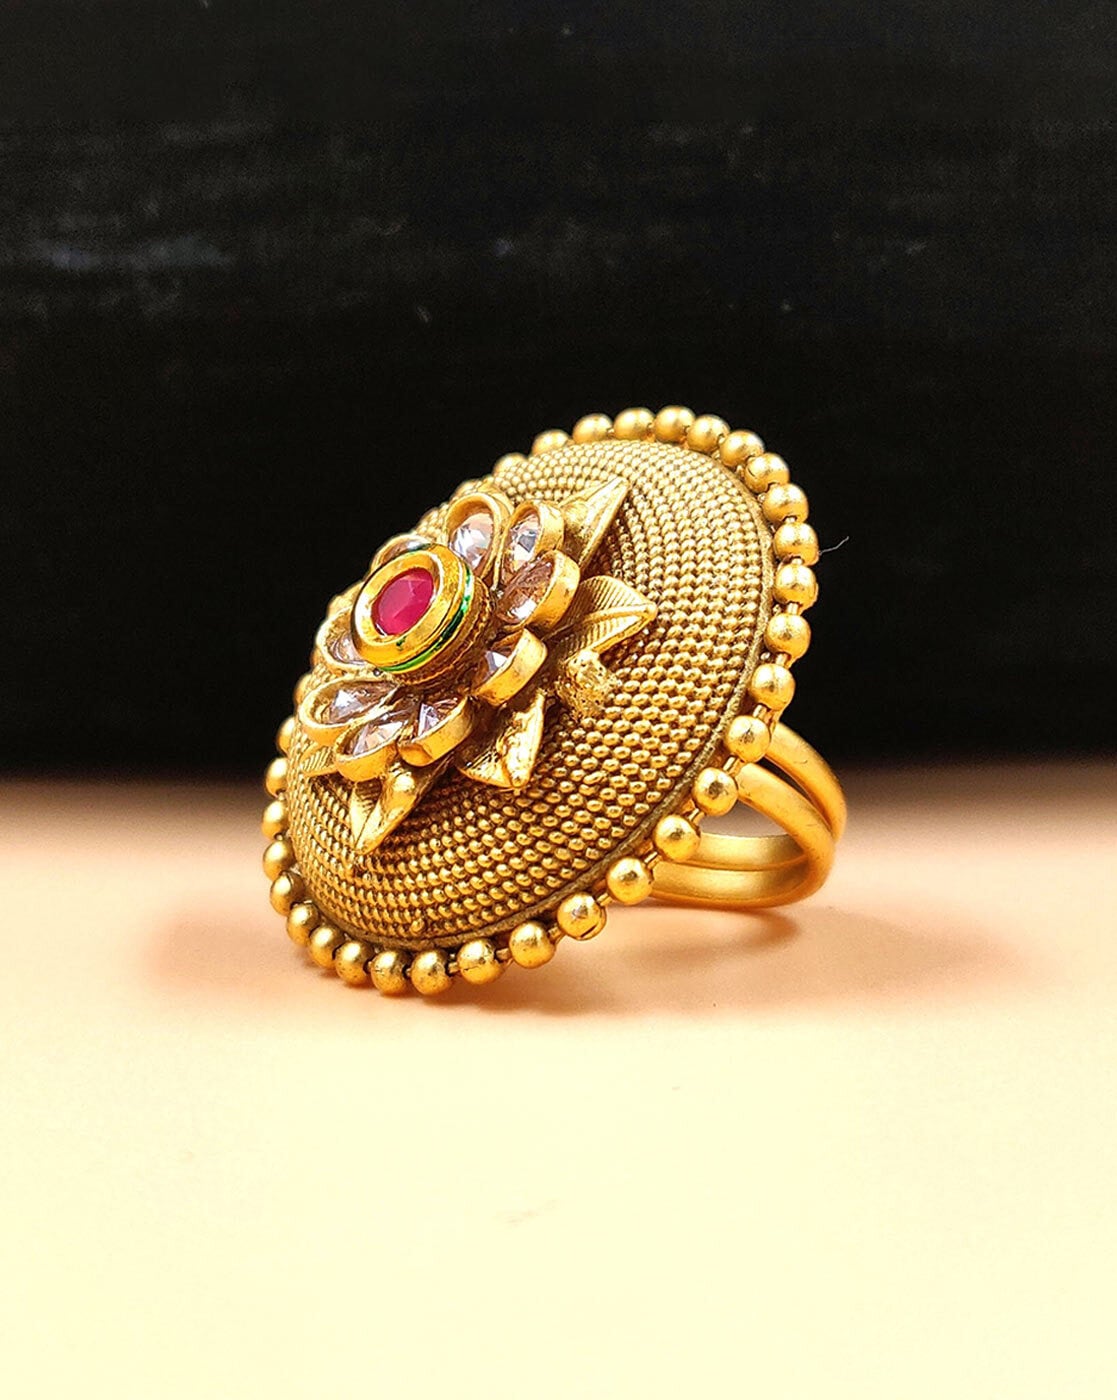 Tanishq Royal Traditional Gold Ring Price Starting From Rs 20,717. Find  Verified Sellers in Panipat - JdMart